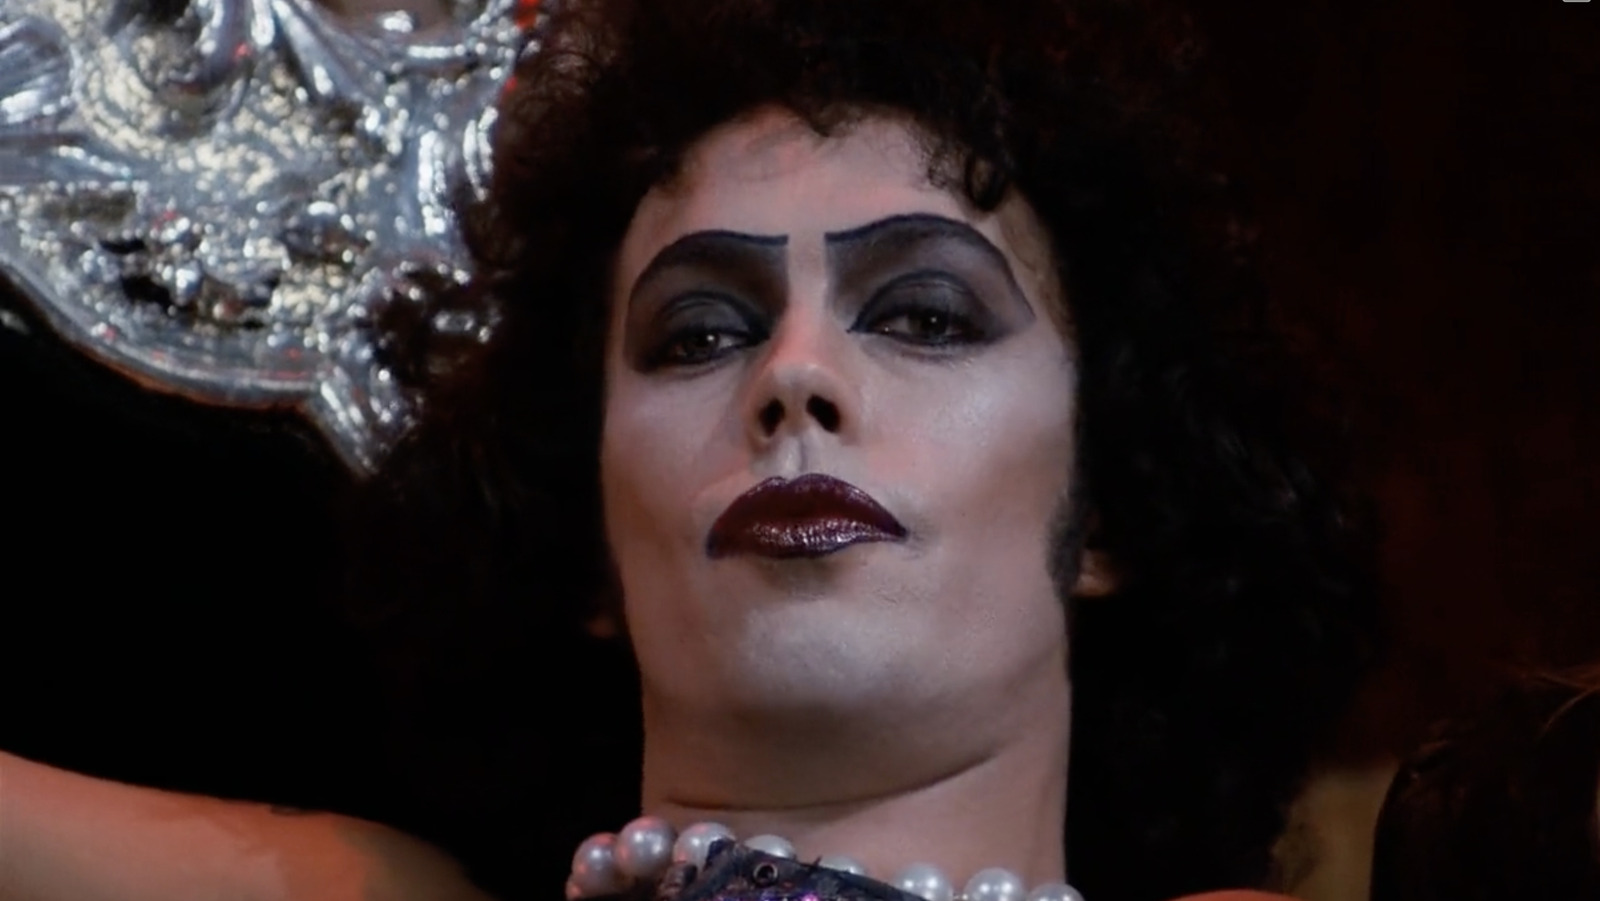 Frank-N-Furter (Tim Curry) being a baddie in 'The Rocky Horror Picture Show'